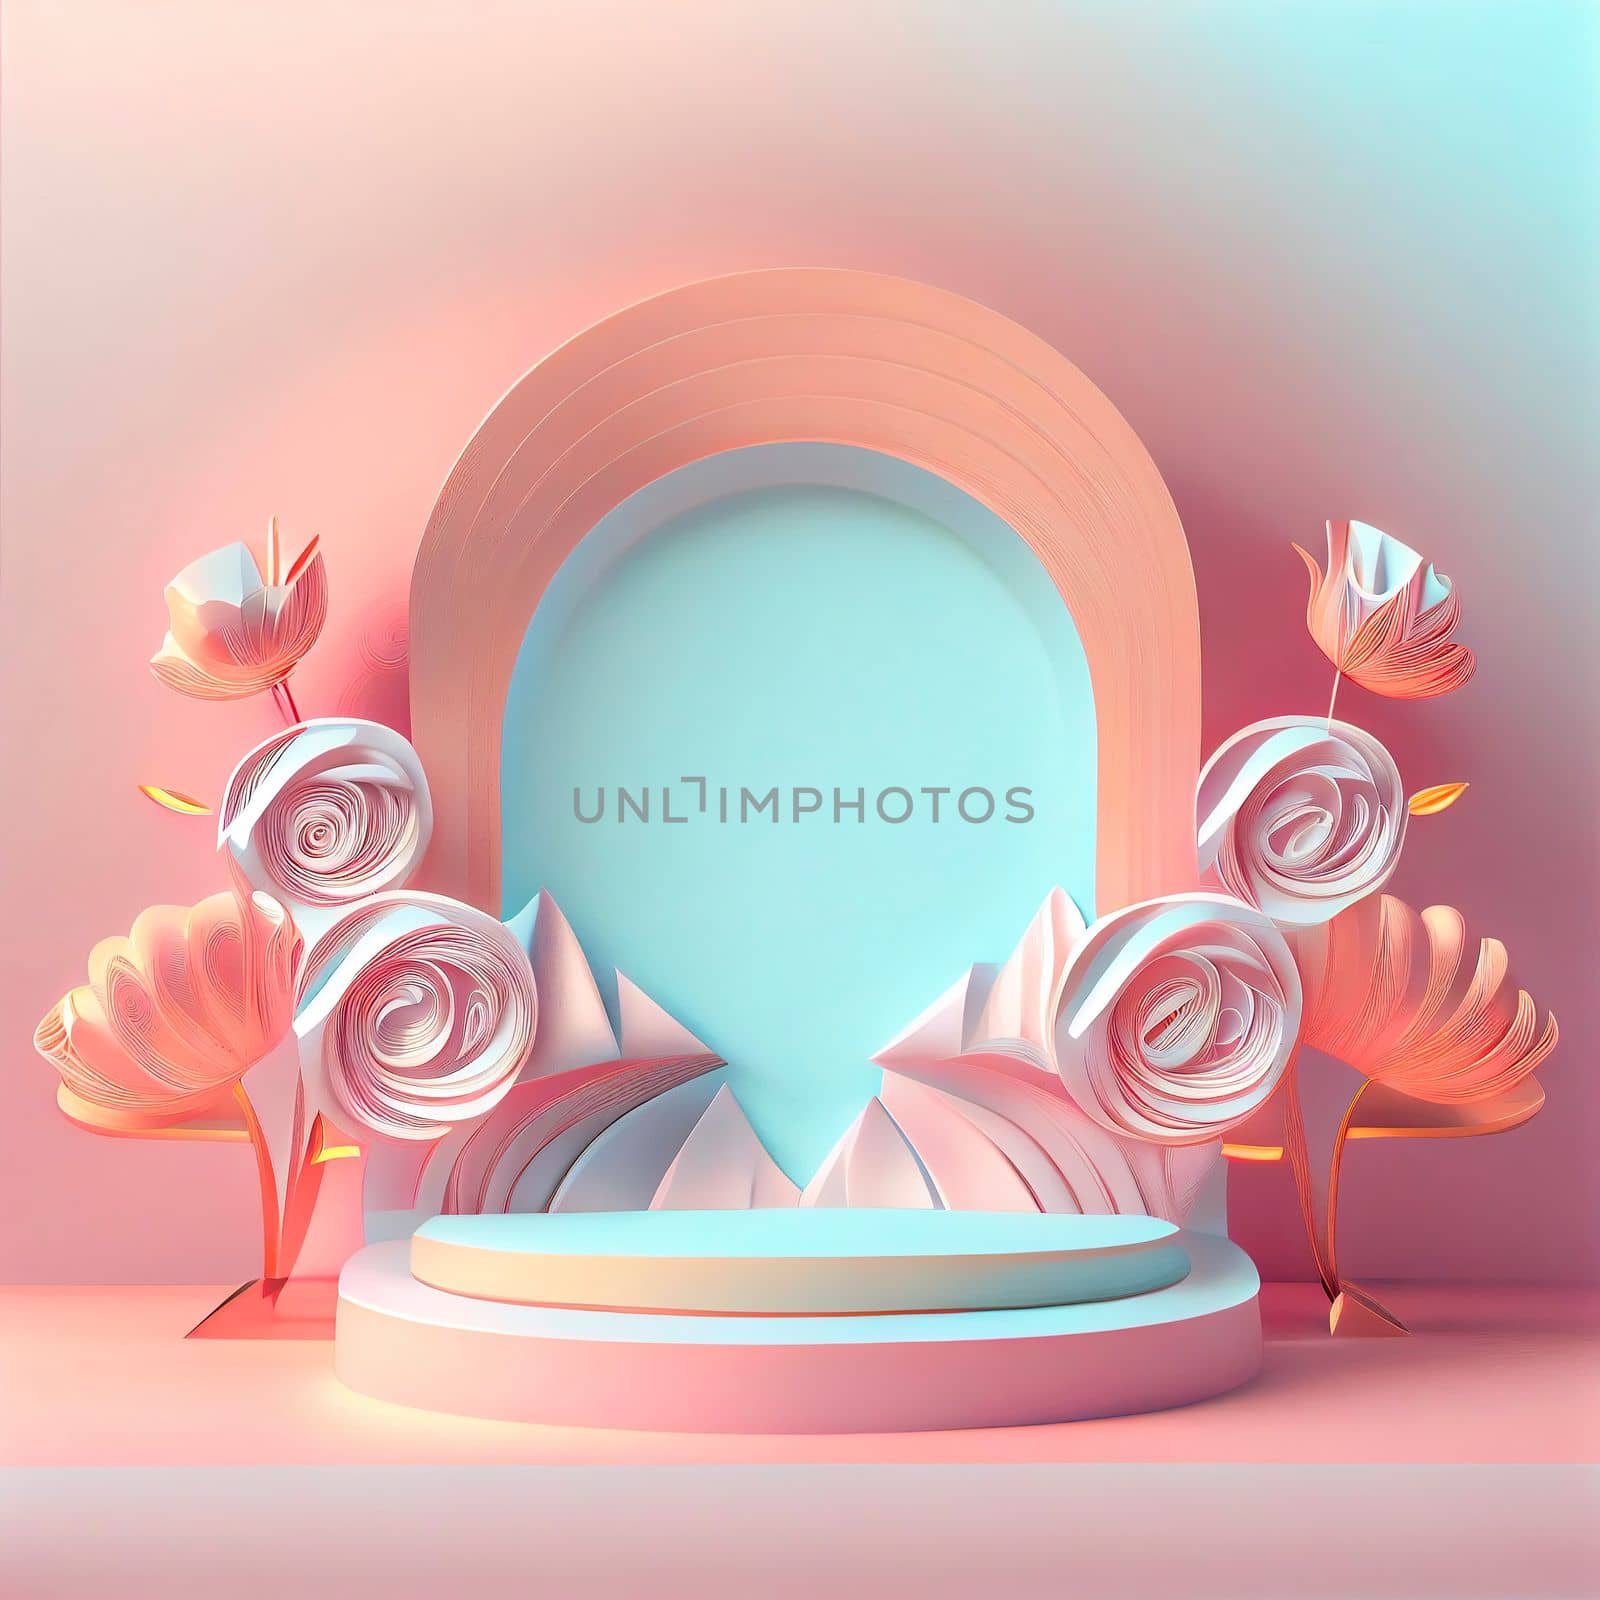 Feminine and elegant 3d podium illustration with abstract flower ornament for product display by templator